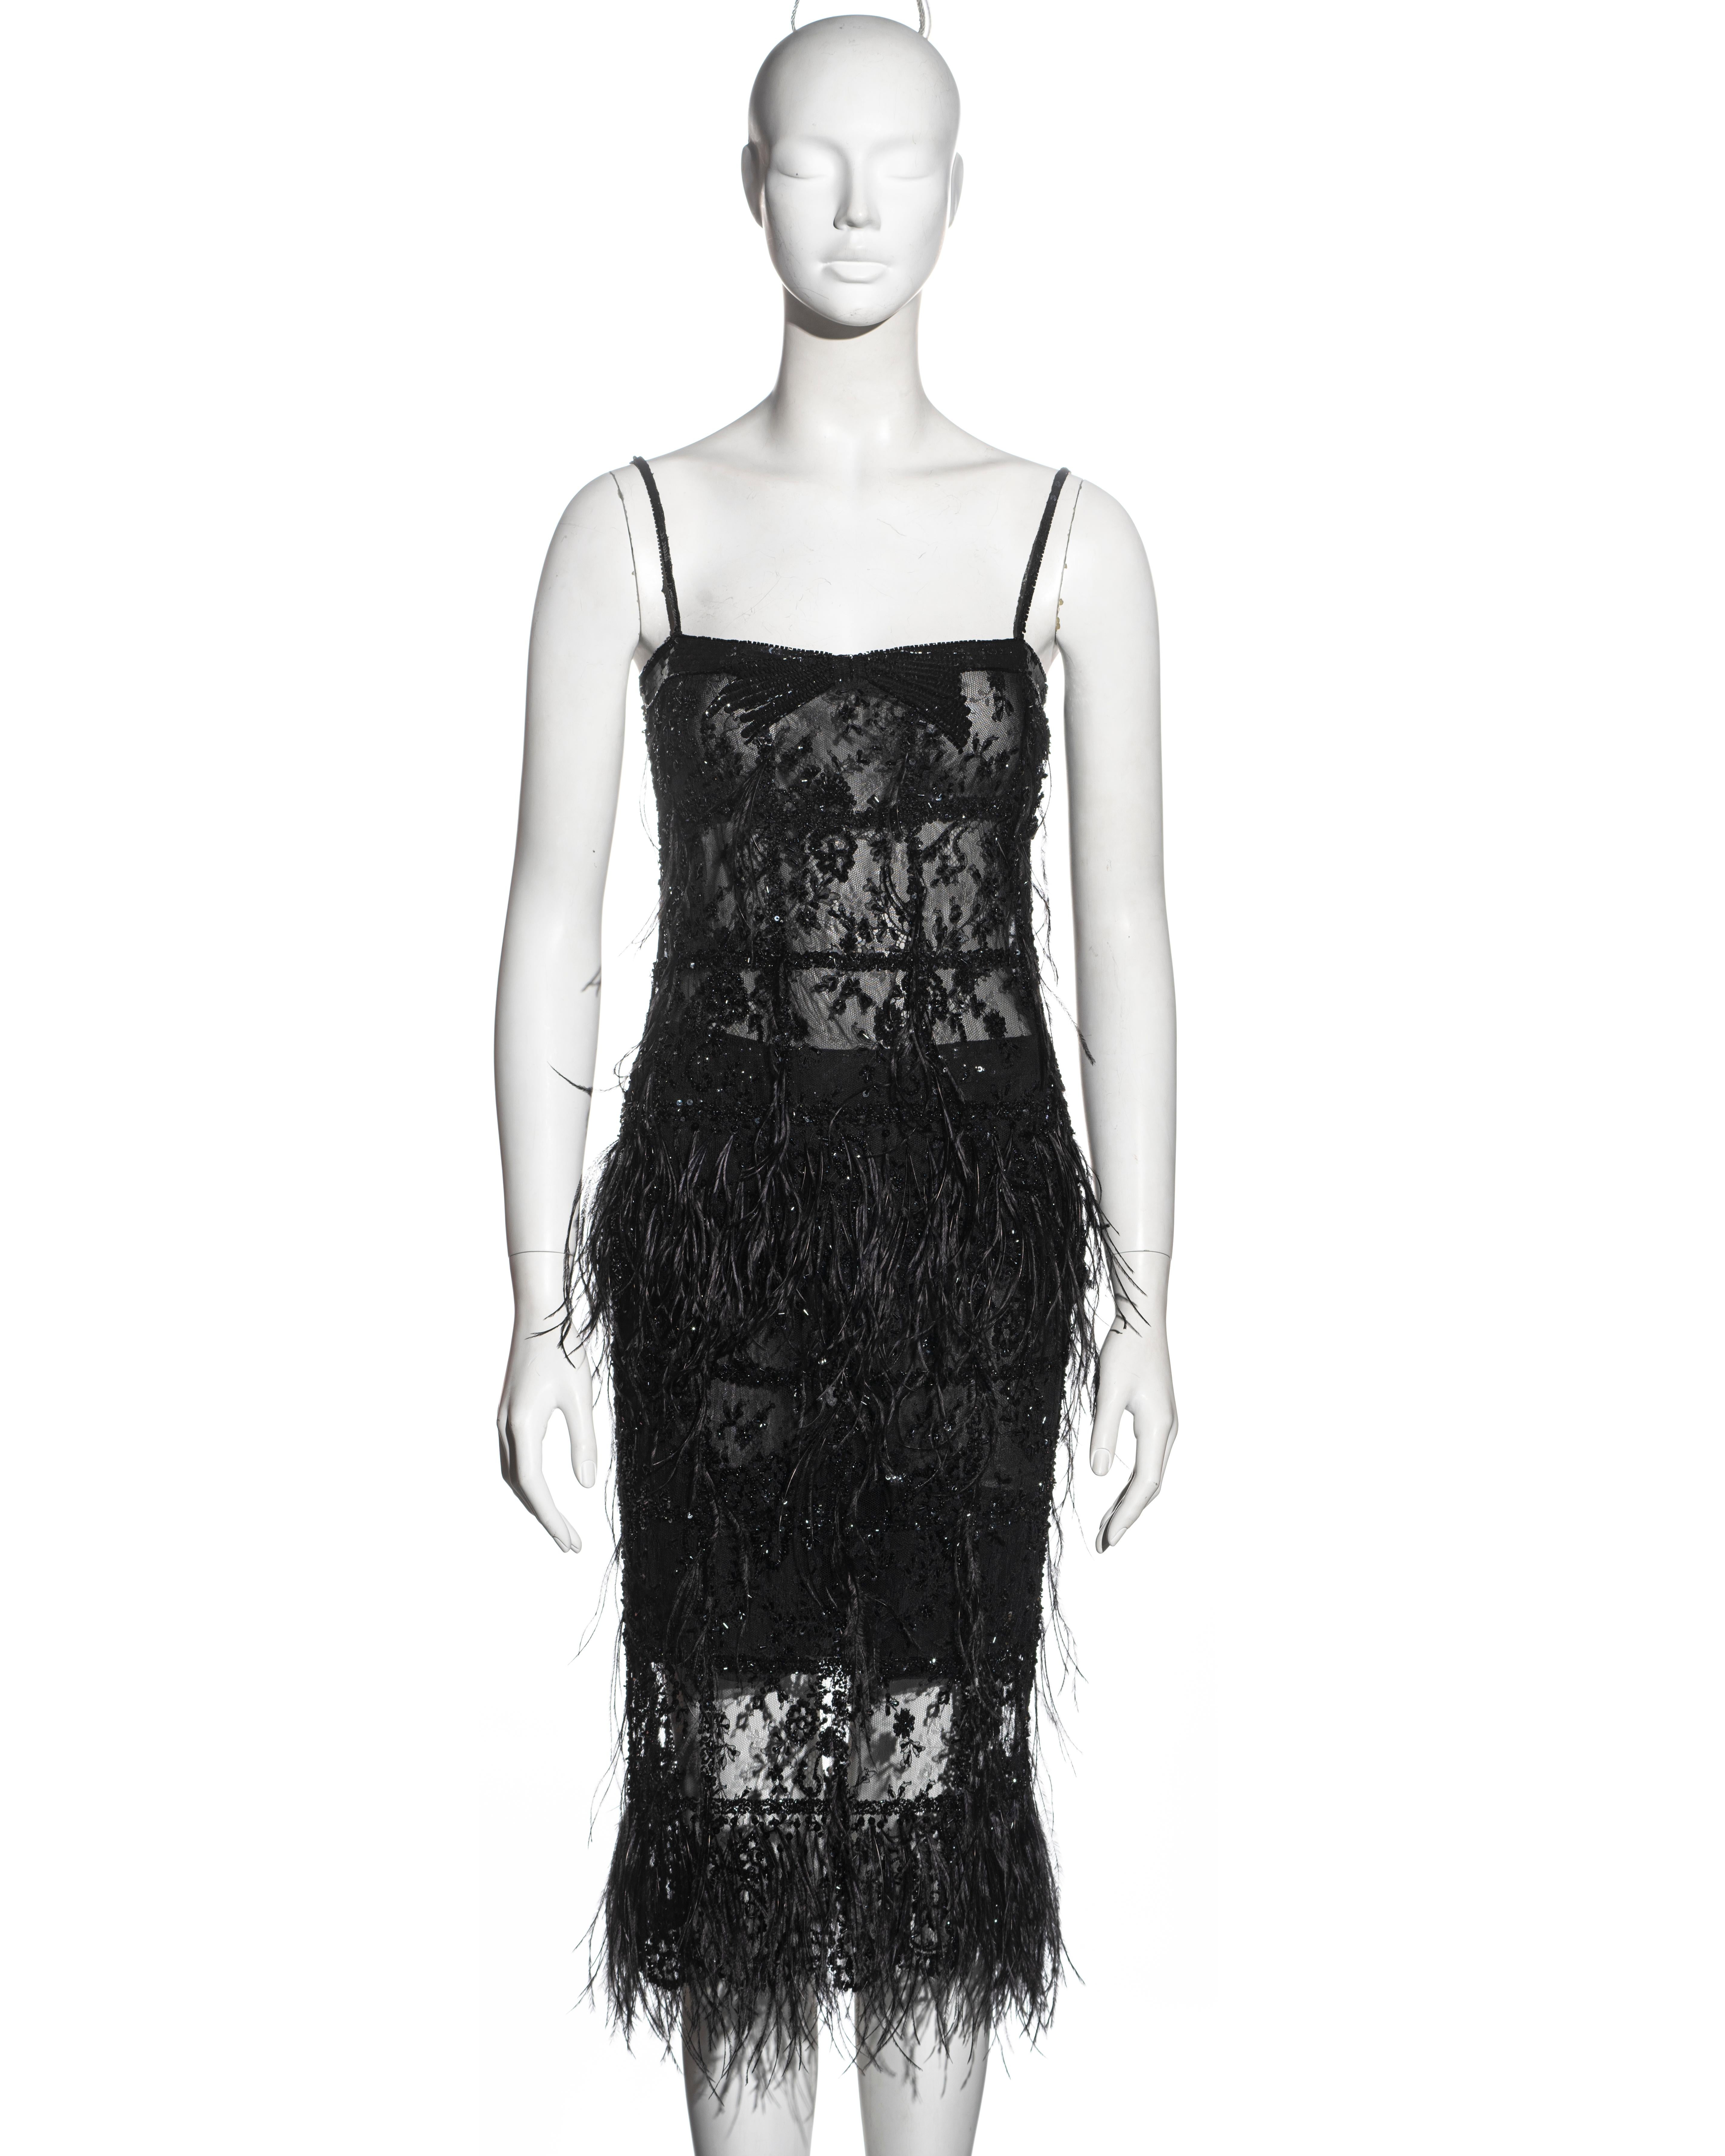 ▪ Valentino evening top and skirt set 
▪ Black beaded French lace 
▪ Ostrich feather trim 
▪ Spaghetti strap top 
▪ Matching mid-length skirt 
▪ US 6 - FR 38 - UK 10 - IT 42 
▪ Fall-Winter 2001
▪ Made in Italy